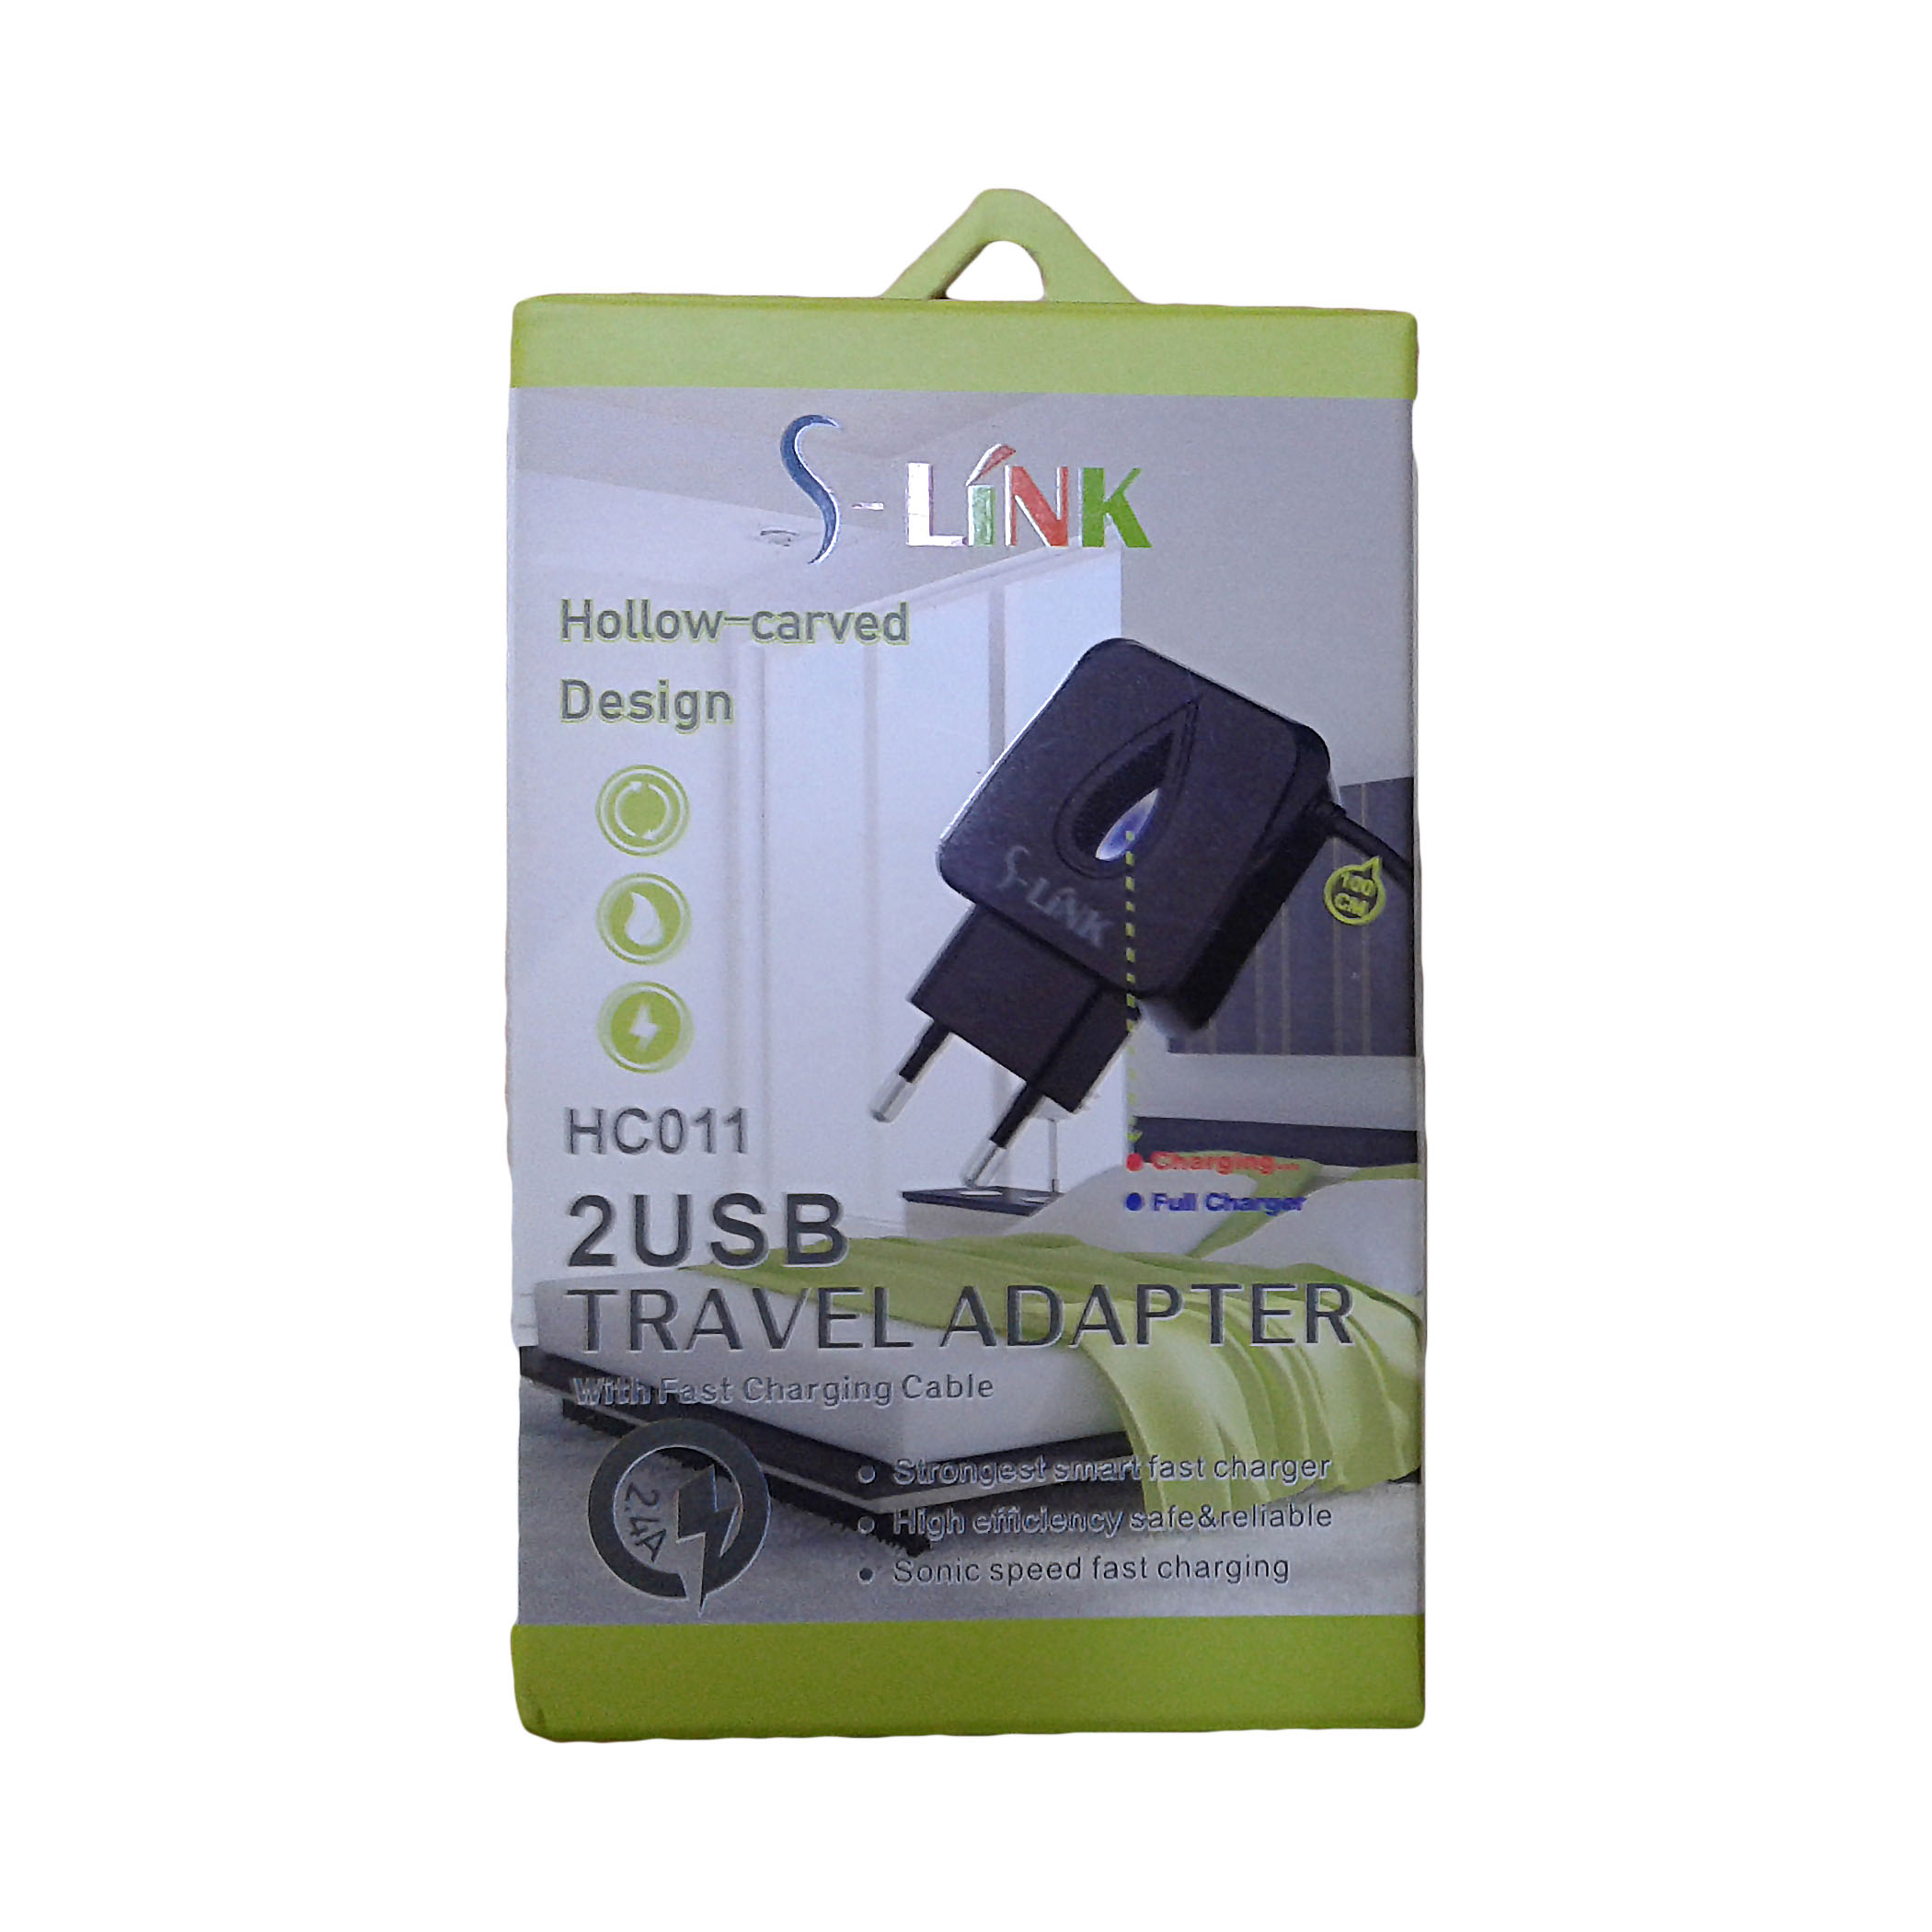 CHARGER DUAL USB FOR MOBILE&TAB ANDROID - S-LINK HC 014/HC 011/HC 012/HC 015 شاحن مخرجين 2.4 امبير مع كبل ,Smartphones & Tab Chargers